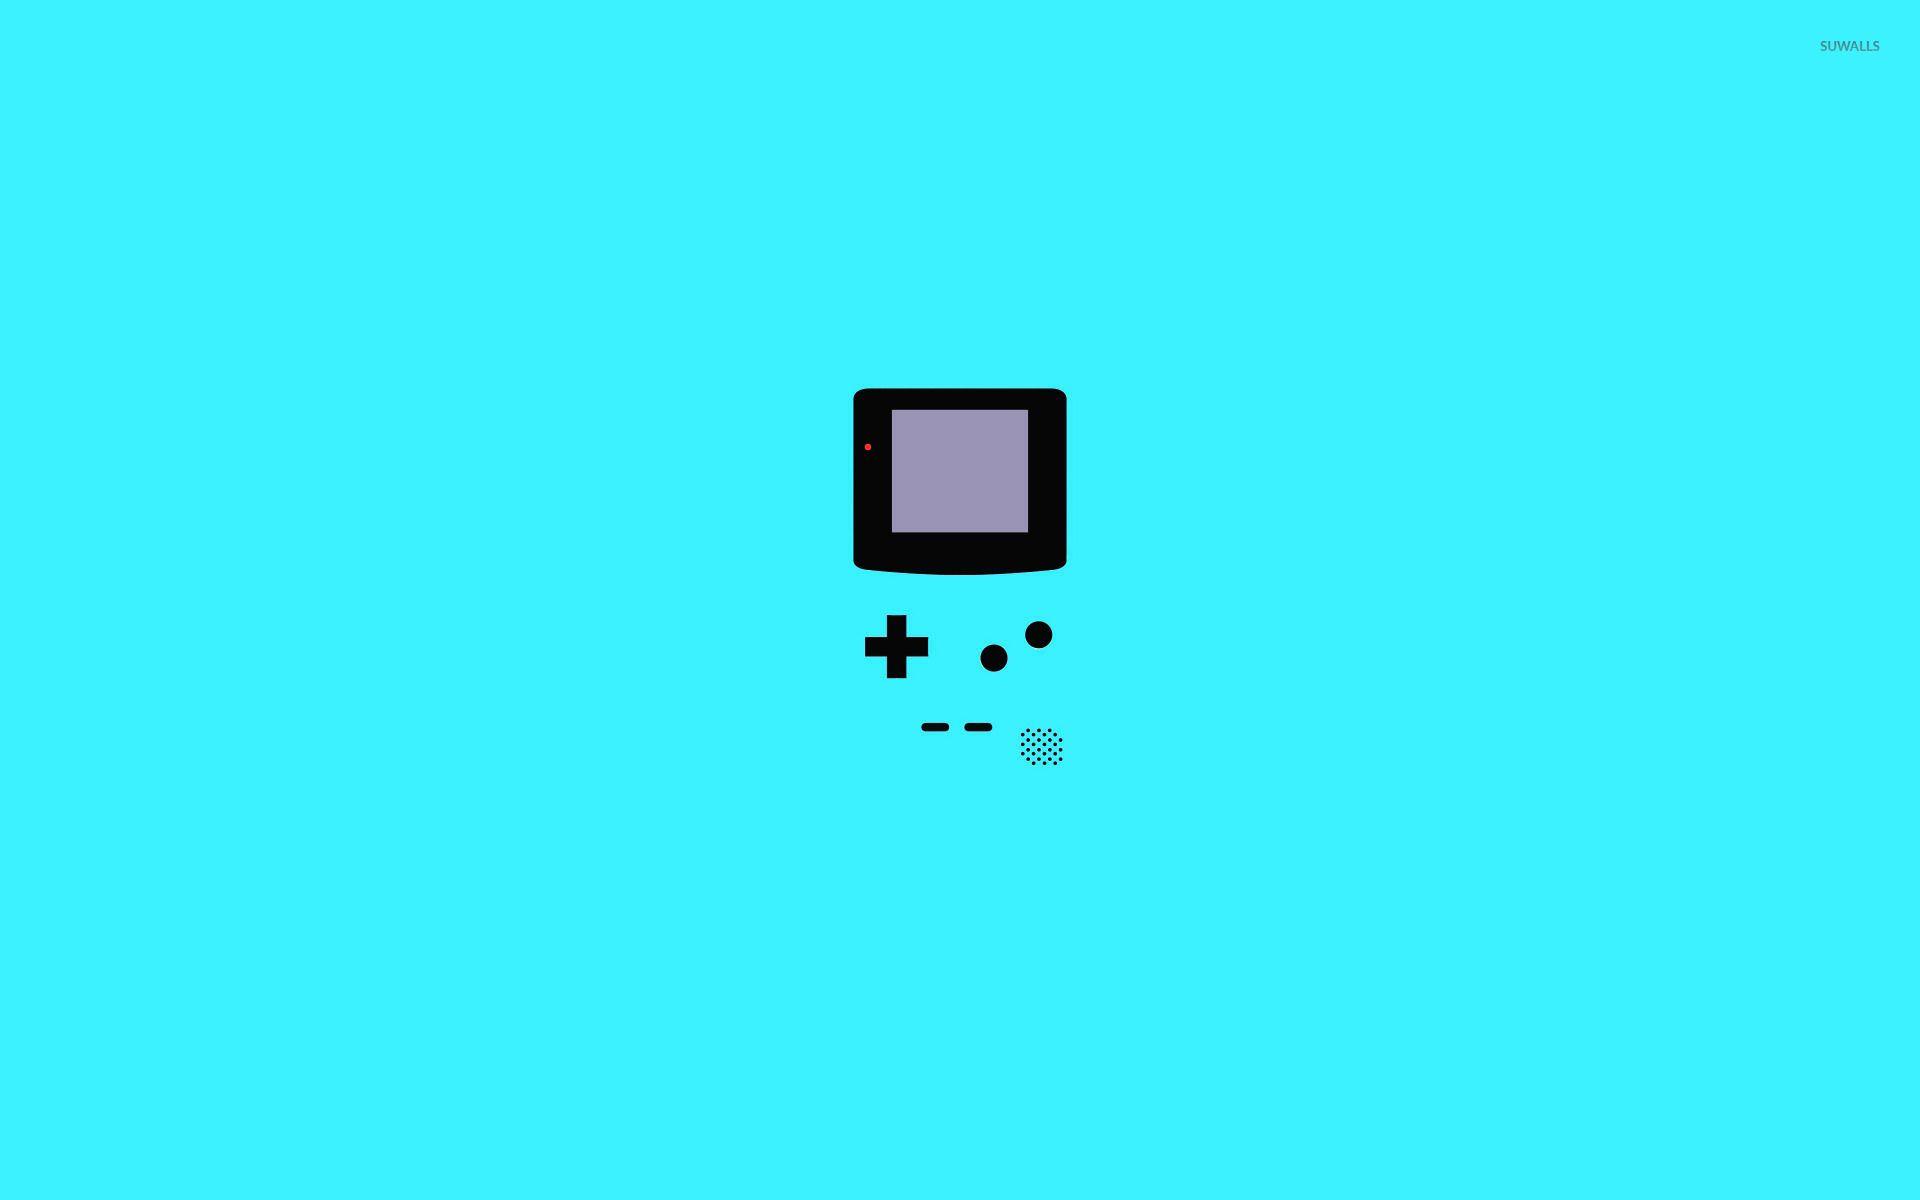 Gameboy Wallpaper (Picture)